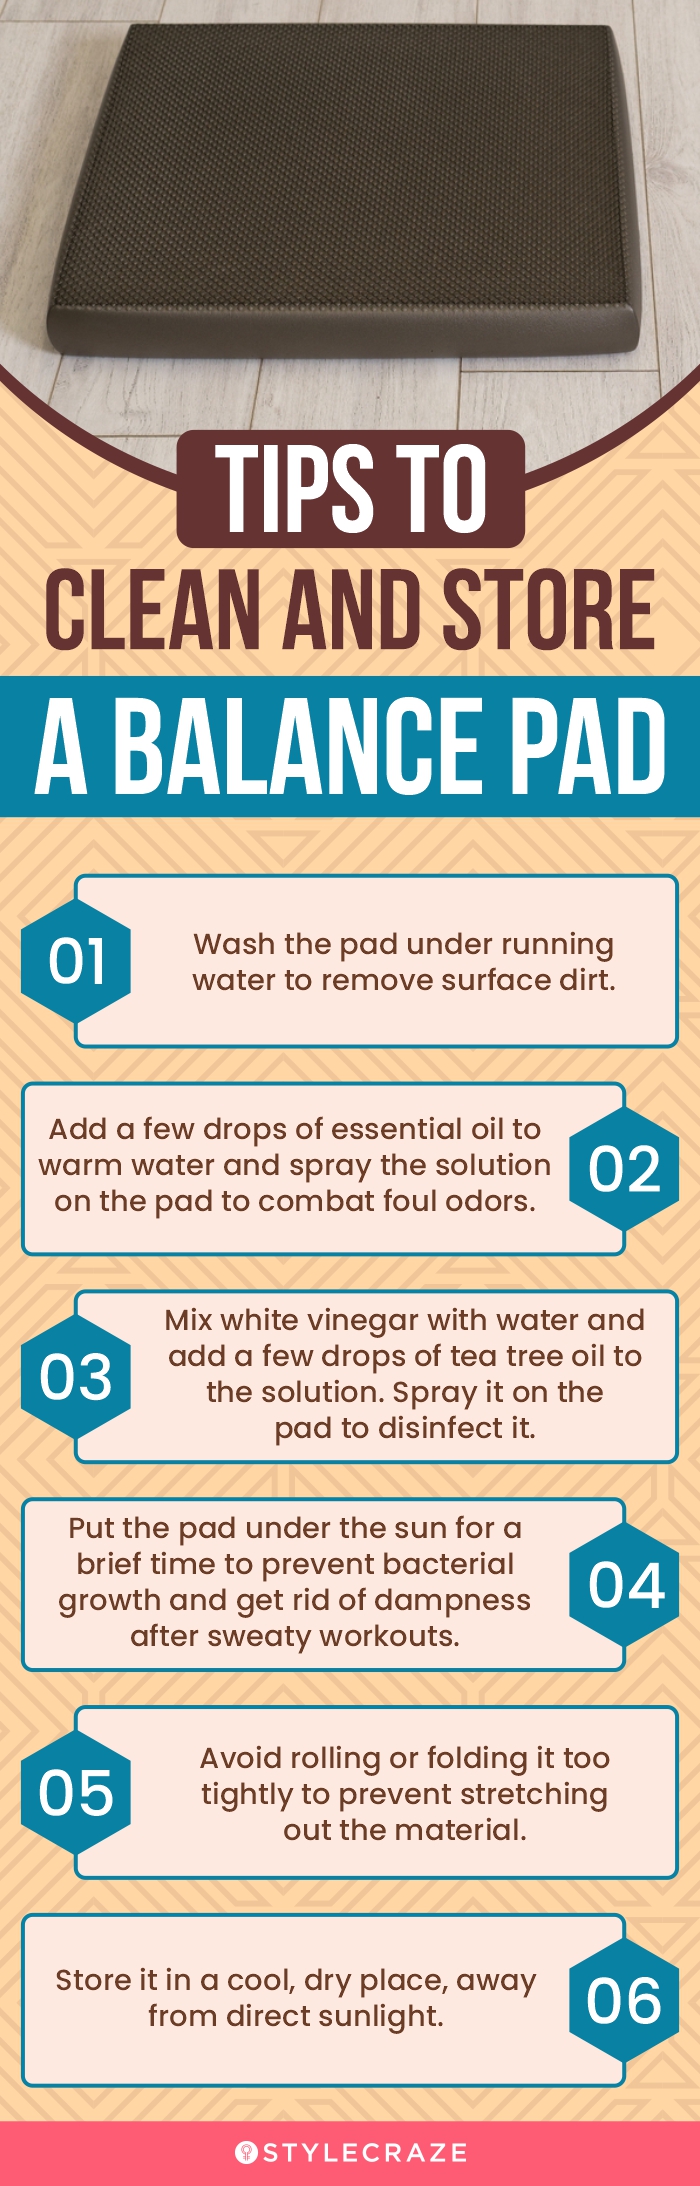 Tips To Clean And Store A Balance Pad (infographic)